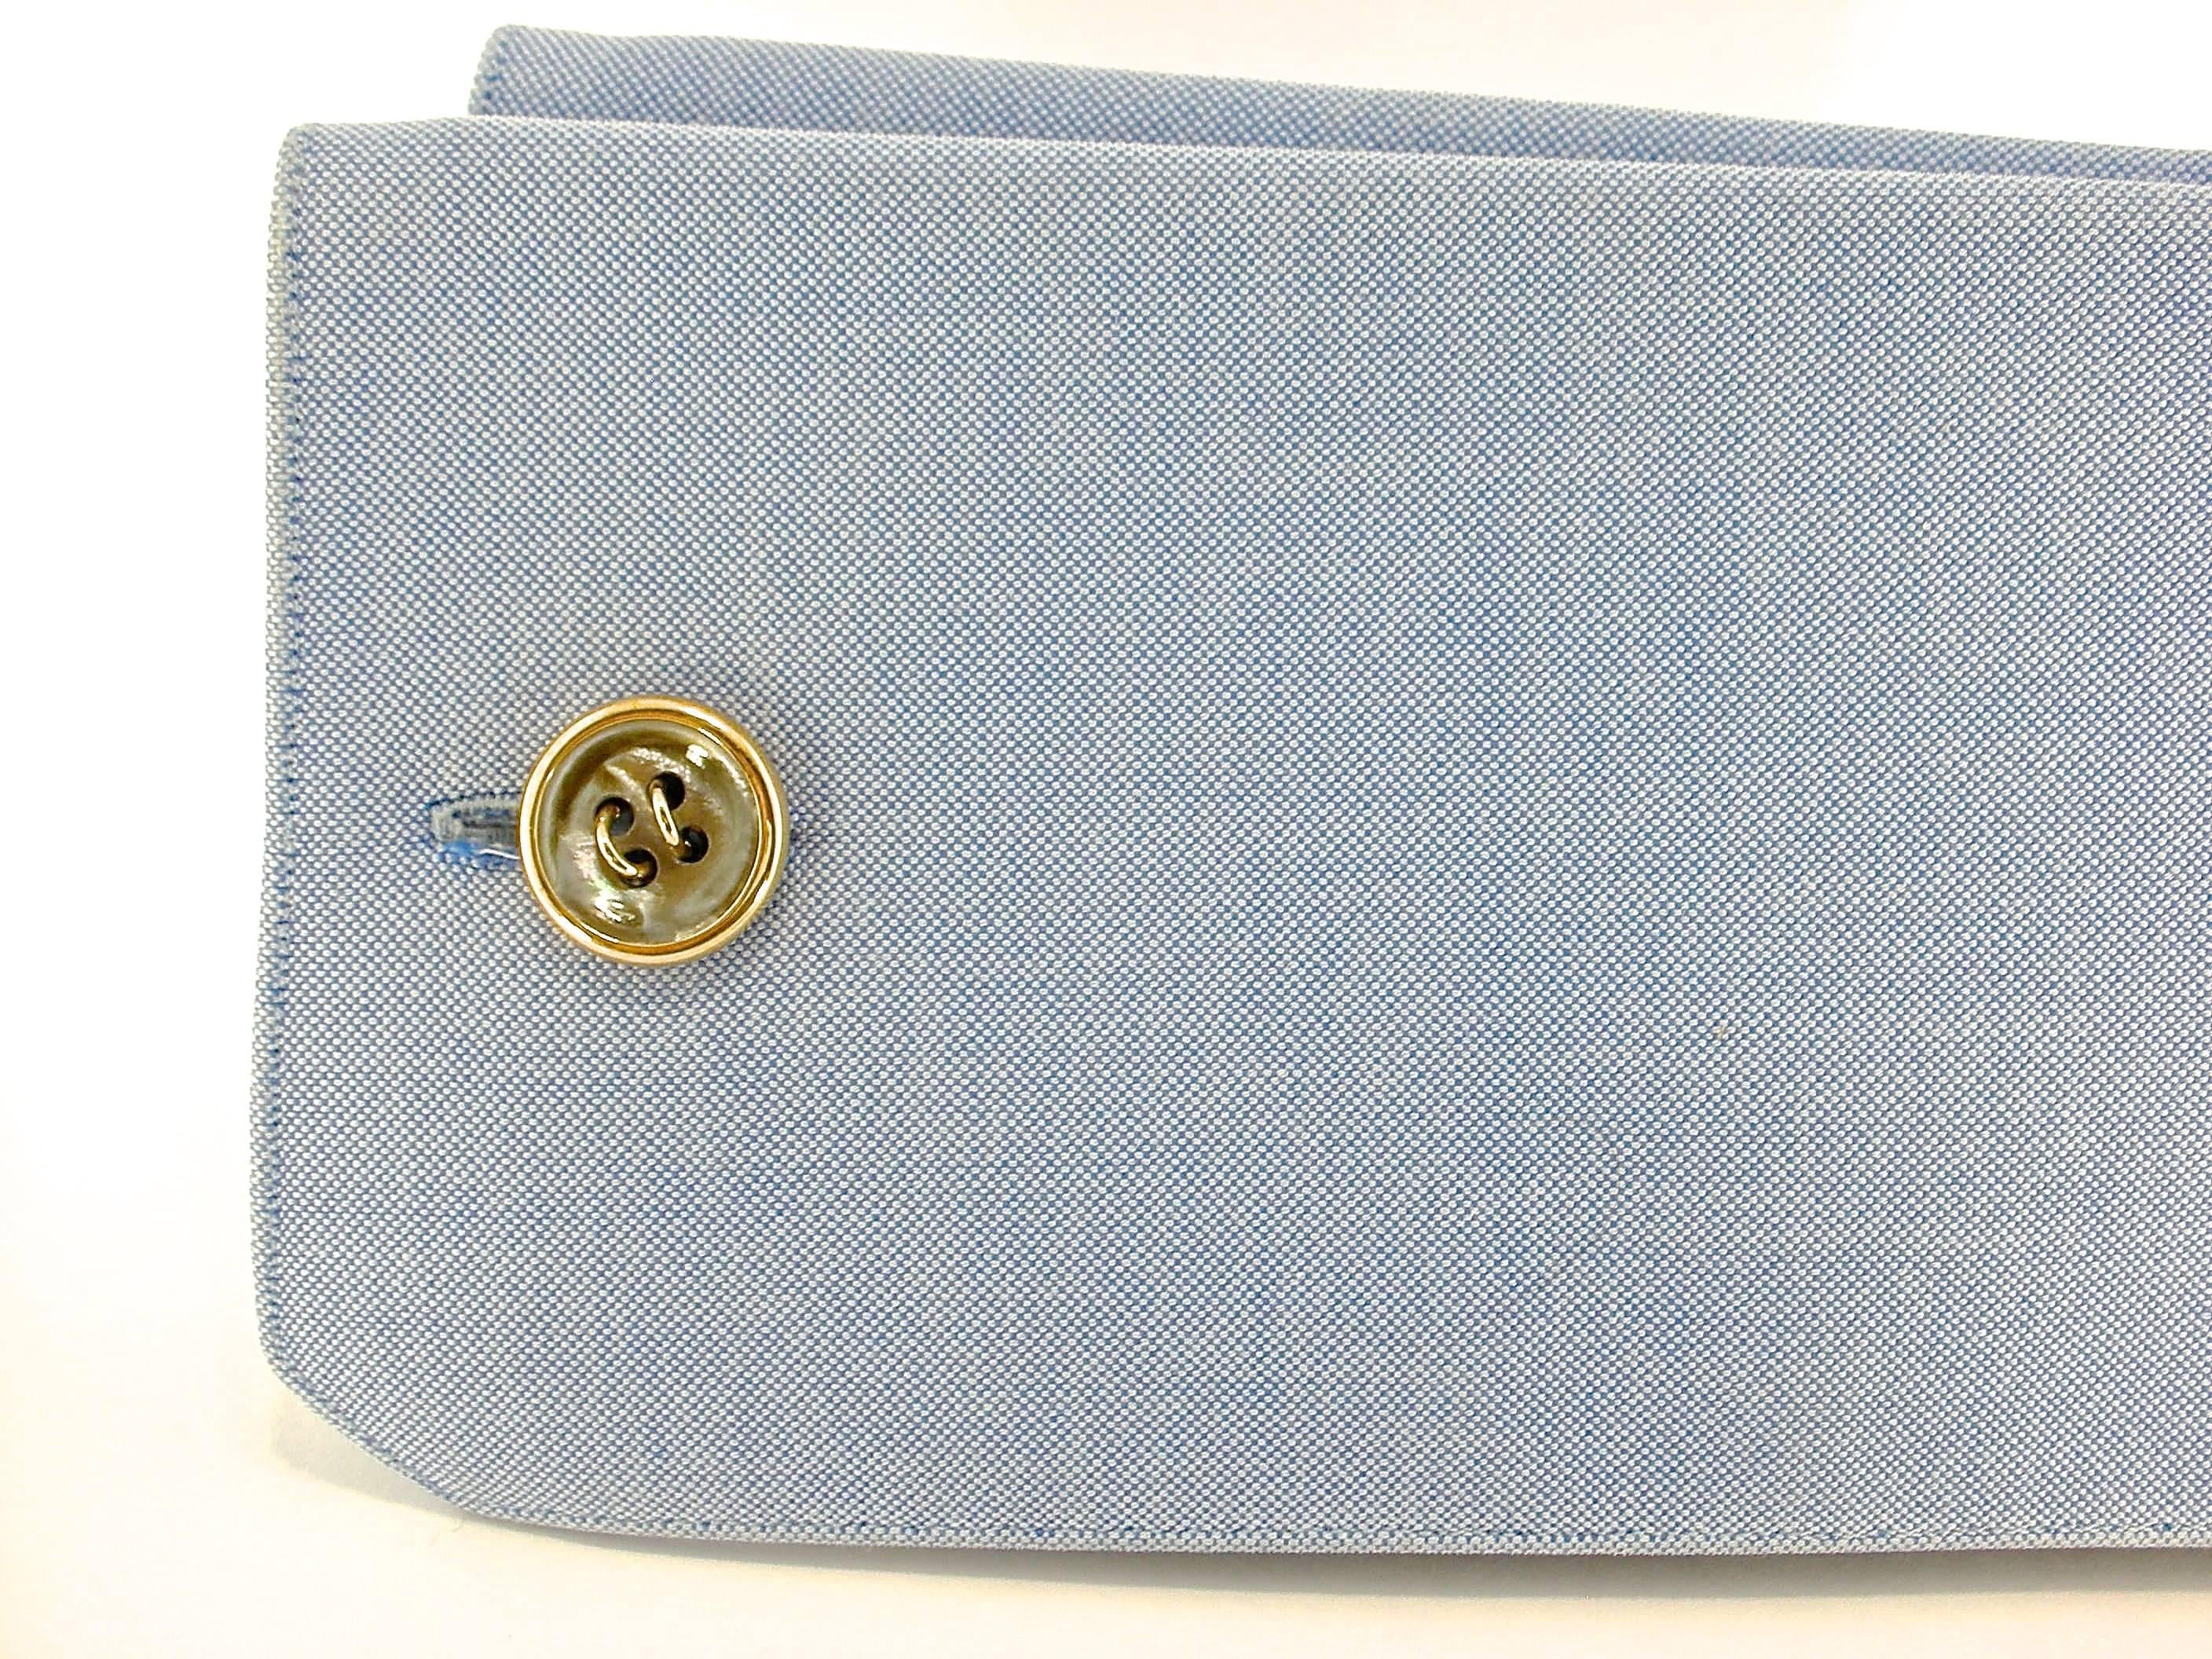 Jona design collection, hand crafted in Italy, 9 karat rose gold cufflinks with grey mother of pearl buttons.
All Jona jewelry is new and has never been previously owned or worn. Each item will arrive at your door beautifully gift wrapped in Jona